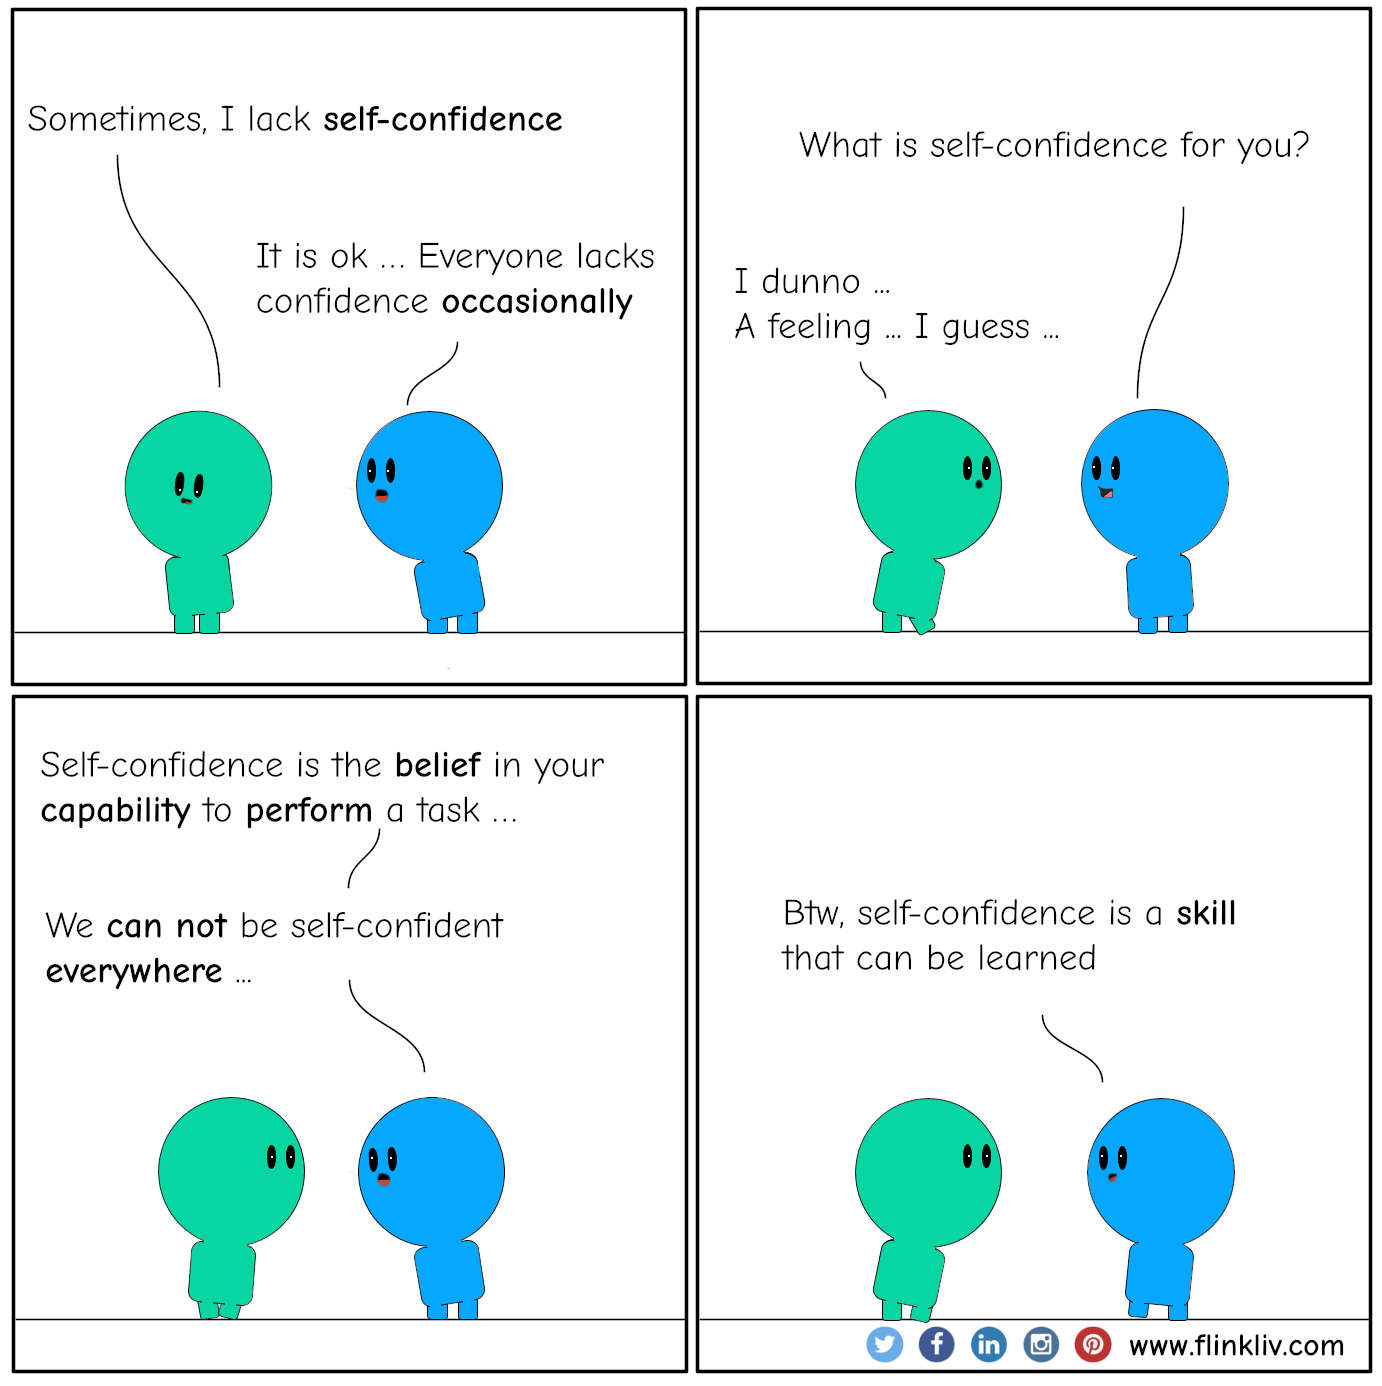 Conversation between A and B about Self-confidence.
              A: Sometimes, I lack self-confidence
B: It is ok; everyone lacks confidence occasionally

B: just to be sure, what is self-confidence for you?
A: I dunno, a feeling, I guess.

B: Self-confidence is the belief in your capability to perform a task.
B: We can not be self-confident everywhere

B: Btw, self-confidence is a skill that can be learned.
